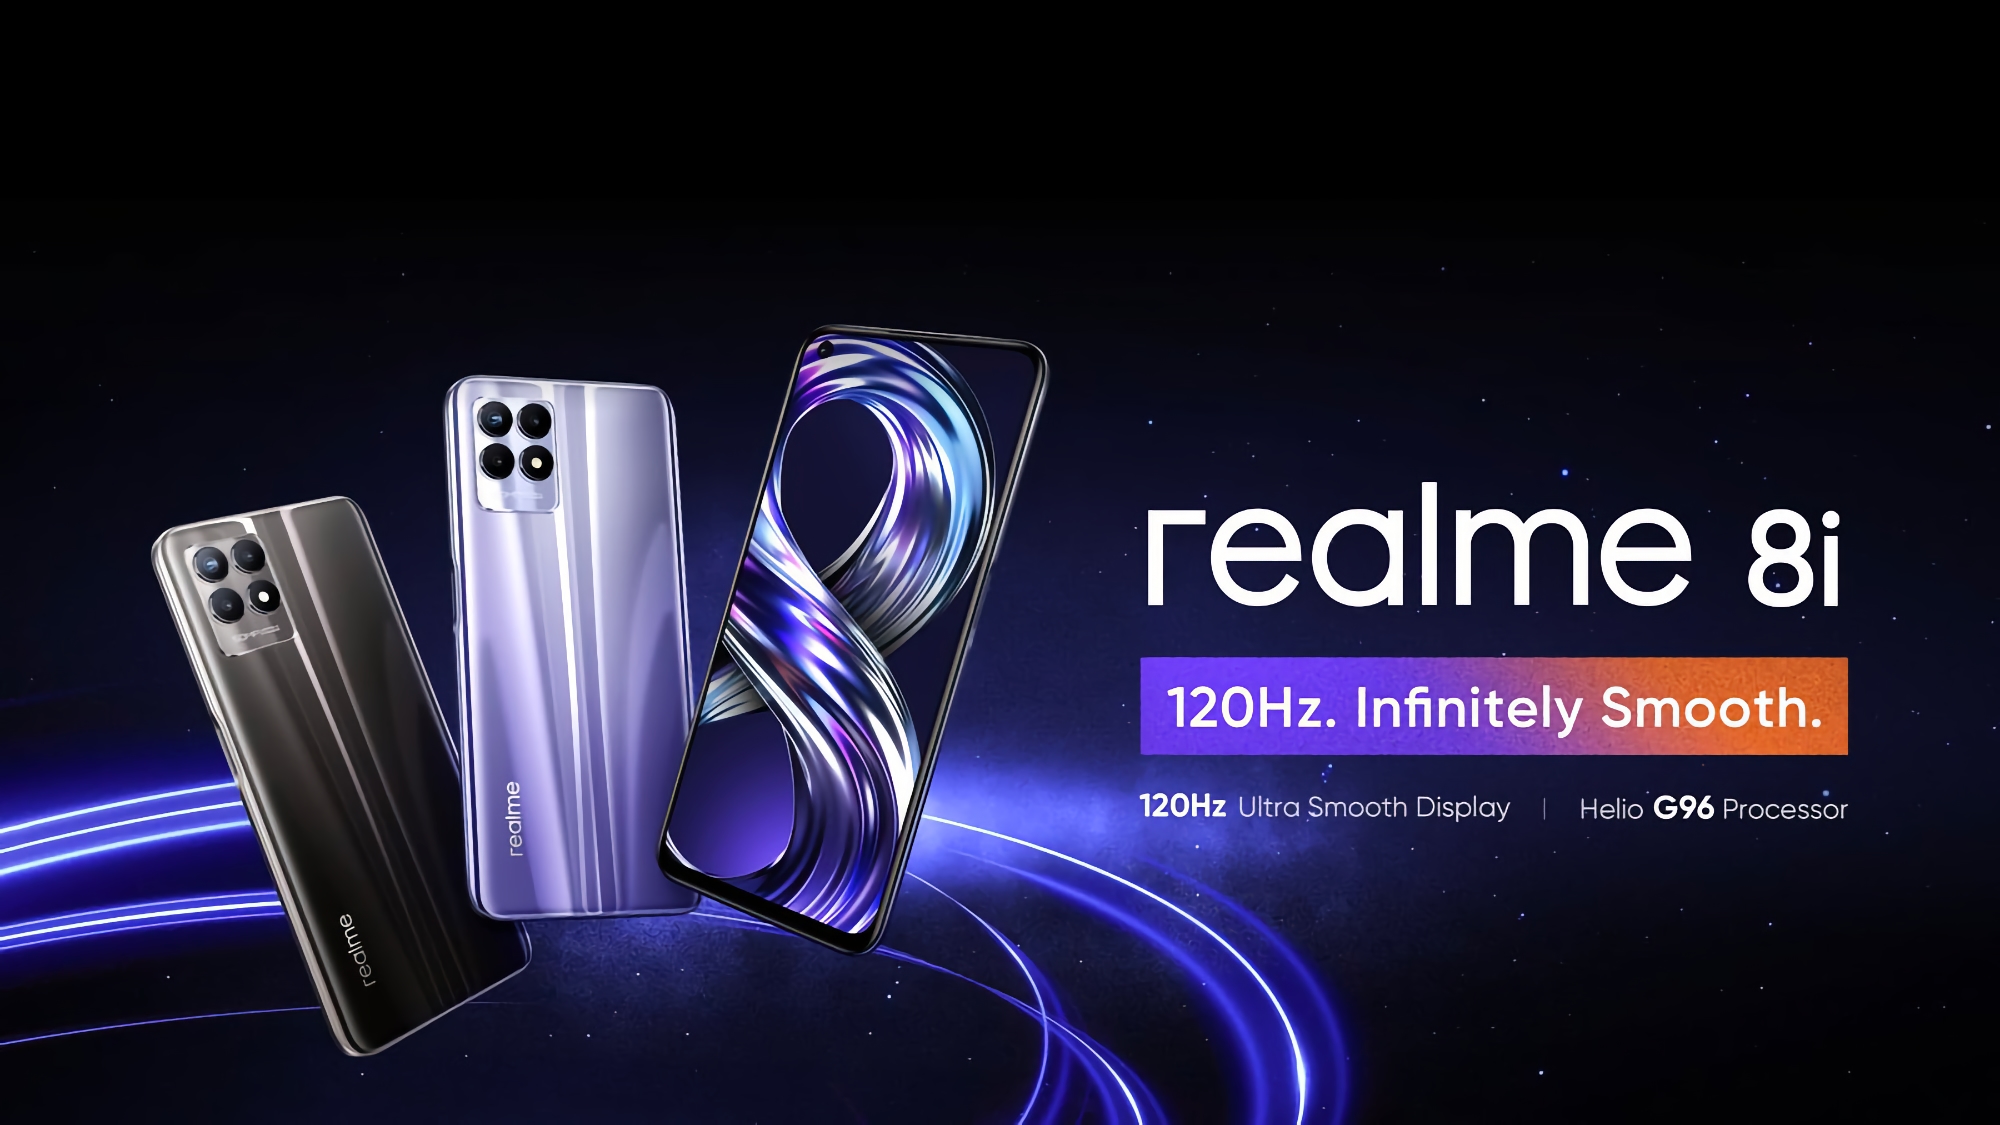 Realme 8i: 120Hz screen, MediaTek Helio G96 chip, 5000mAh battery and up to 11GB of RAM for $190